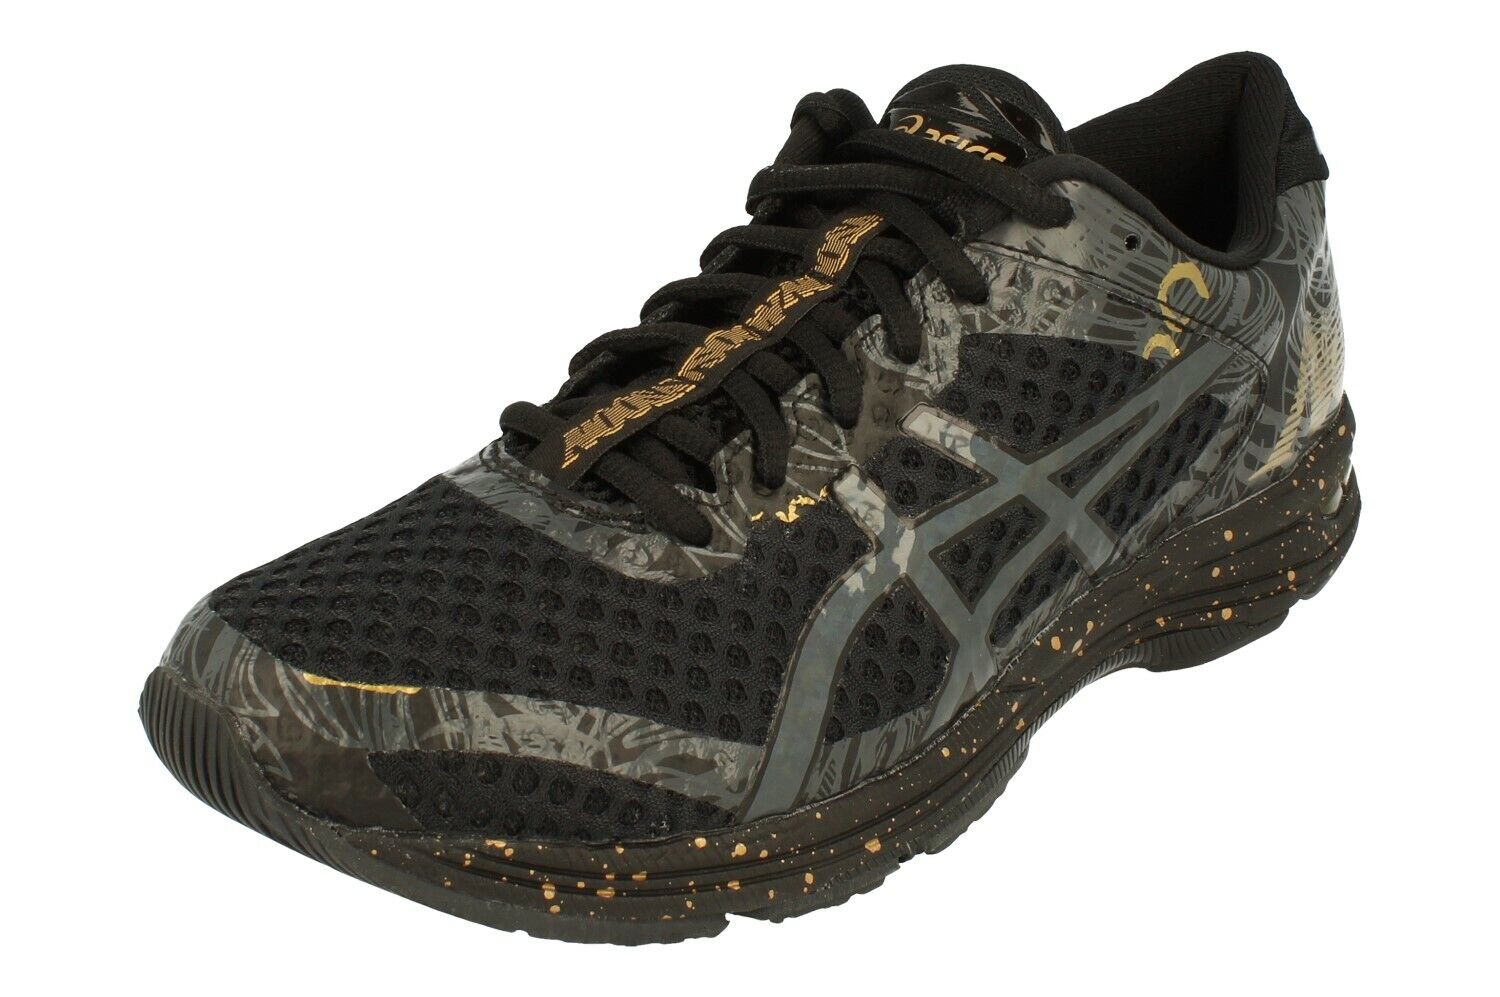 Asics Gel-Noosa Tri 11 Mens Running Trainers 1011A631 Sneakers 001 |